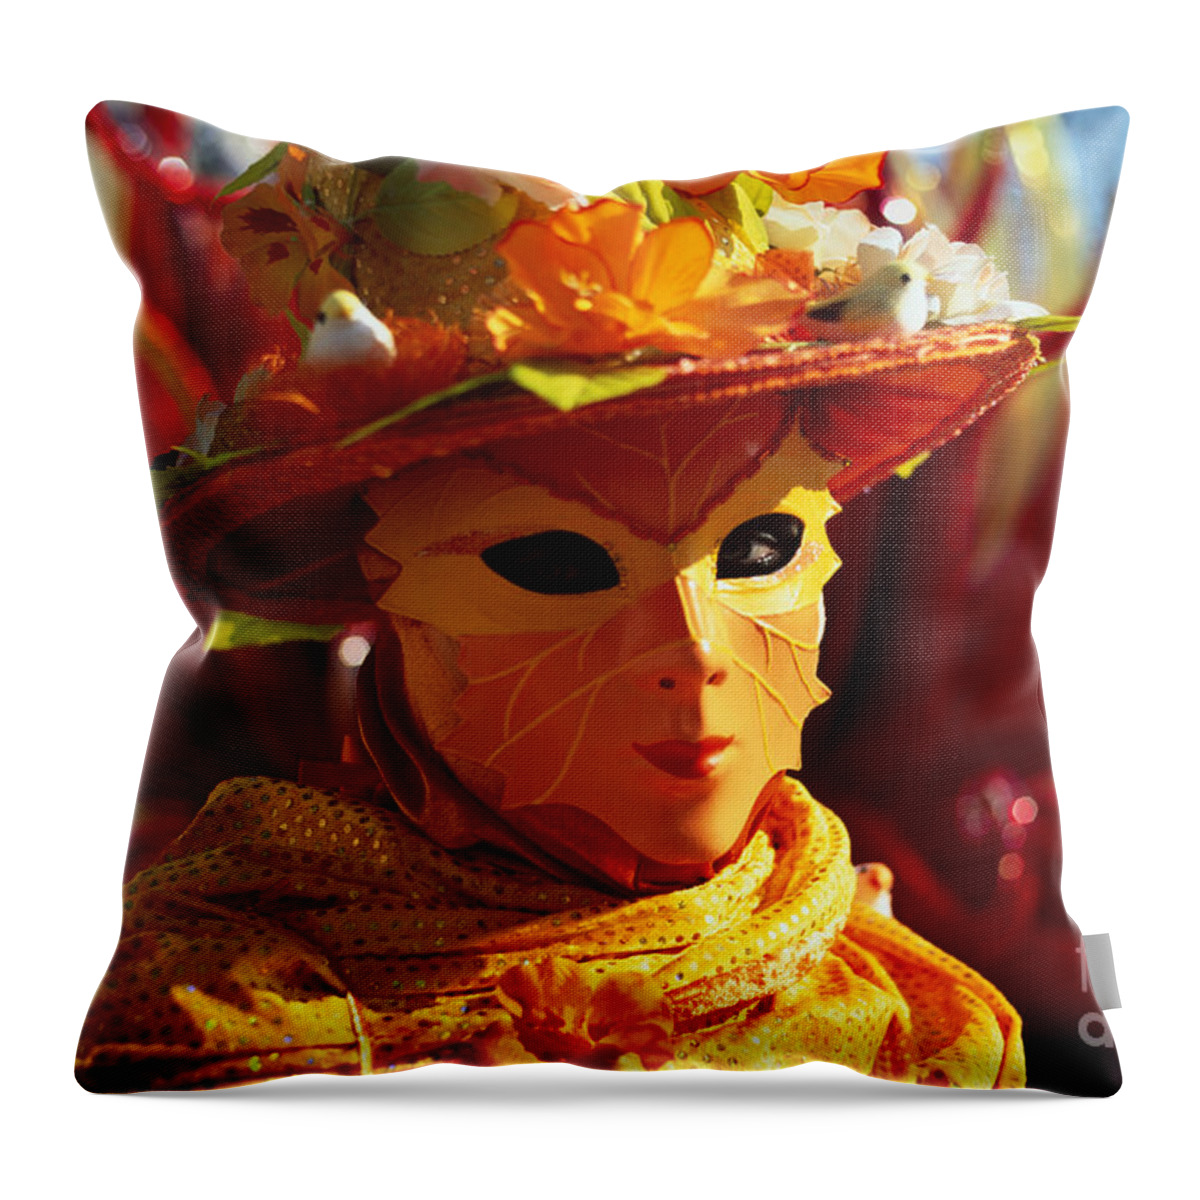 Venezia Throw Pillow featuring the photograph Flaming mask by Riccardo Mottola